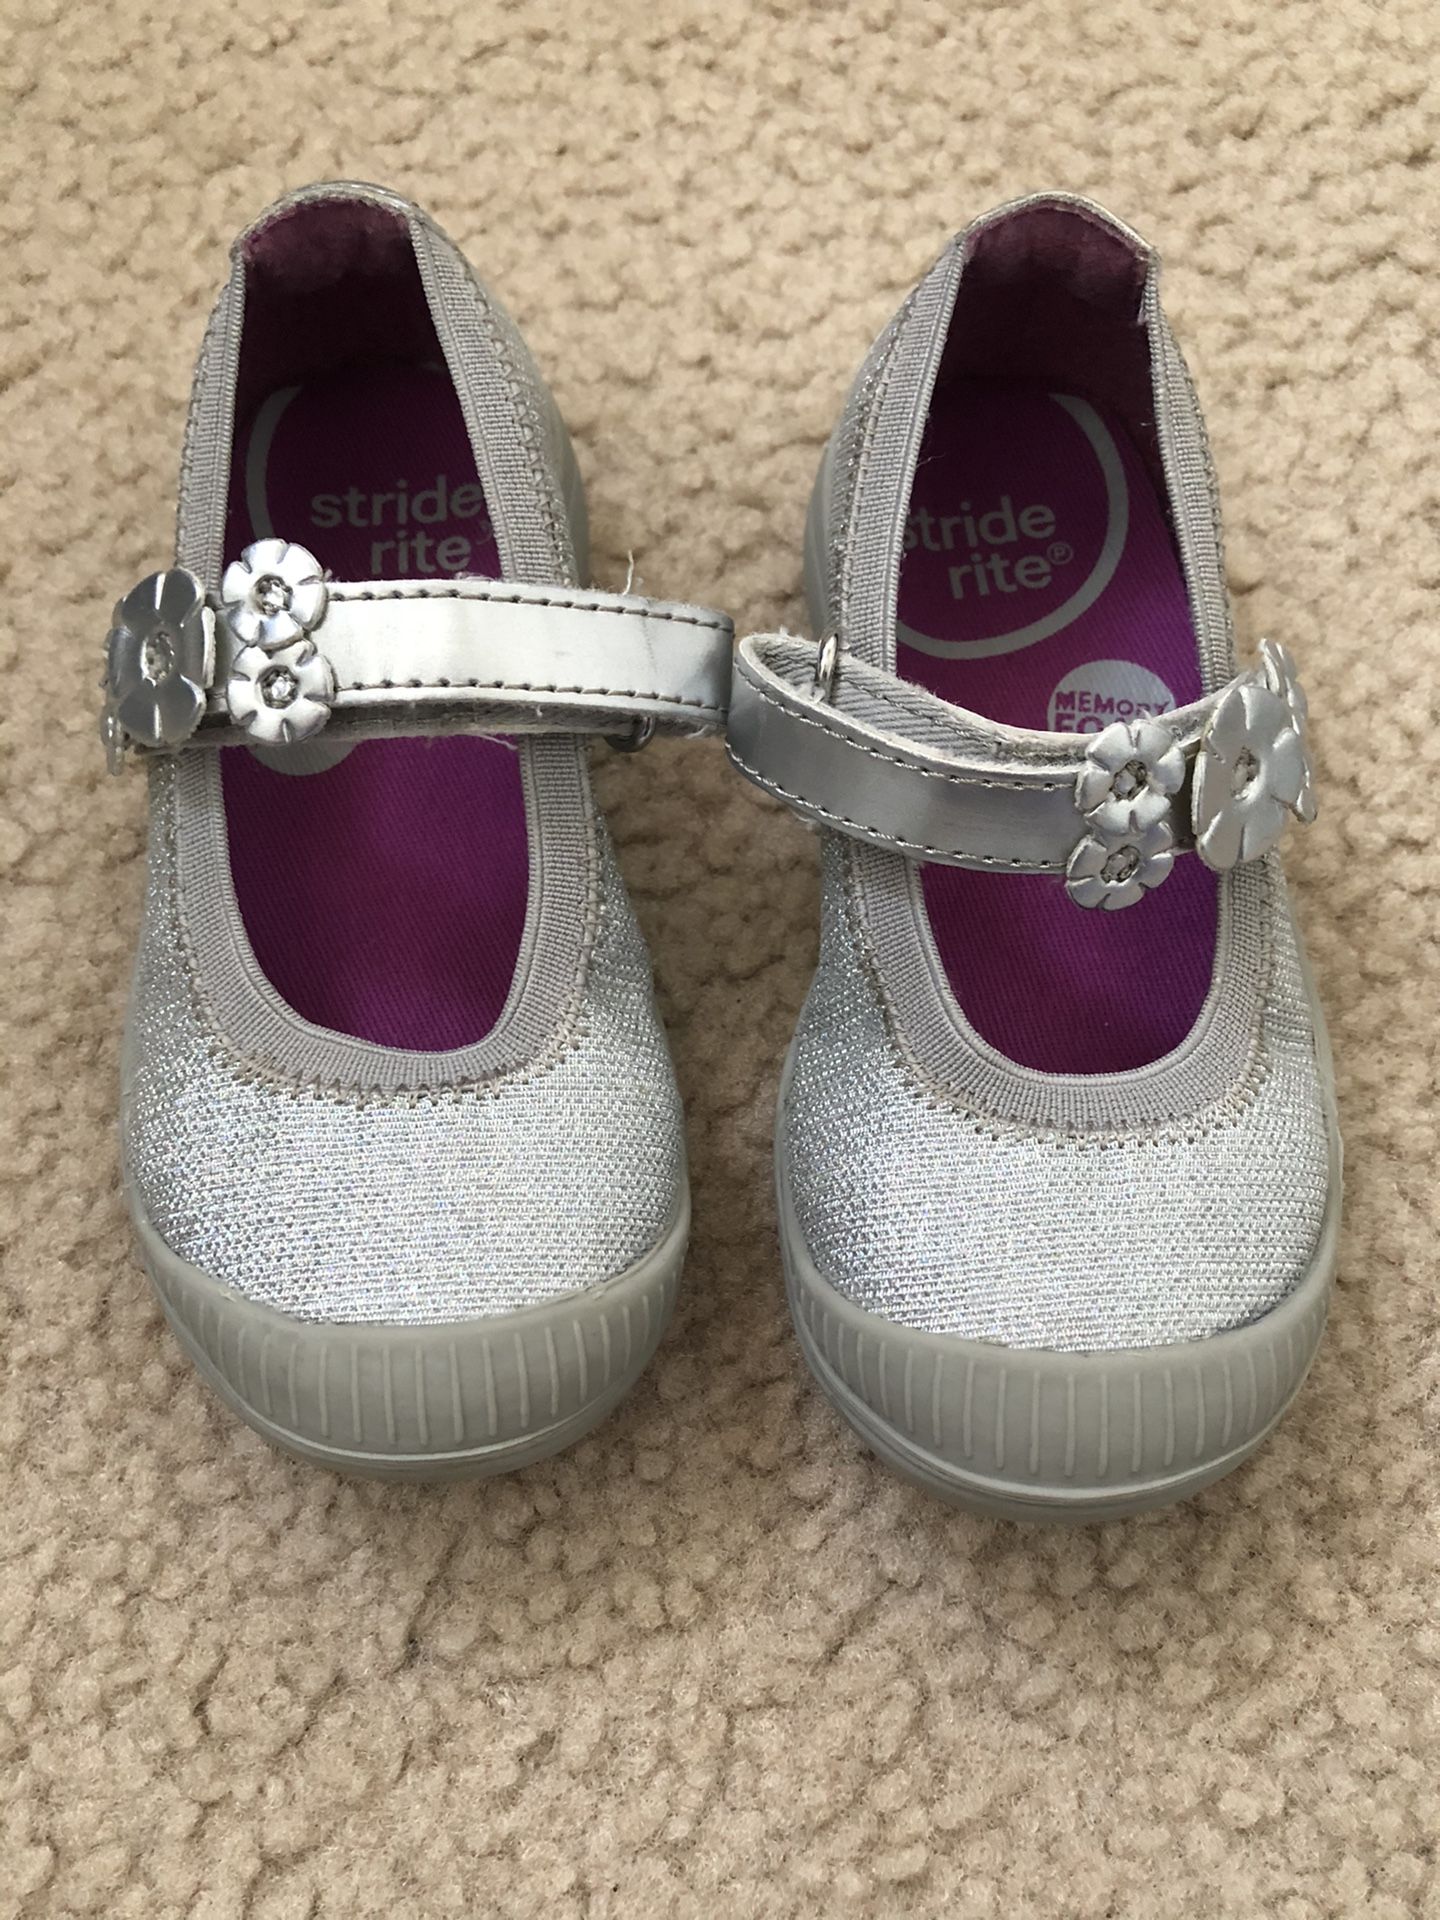 Toddler girl shoes, size 6.5US